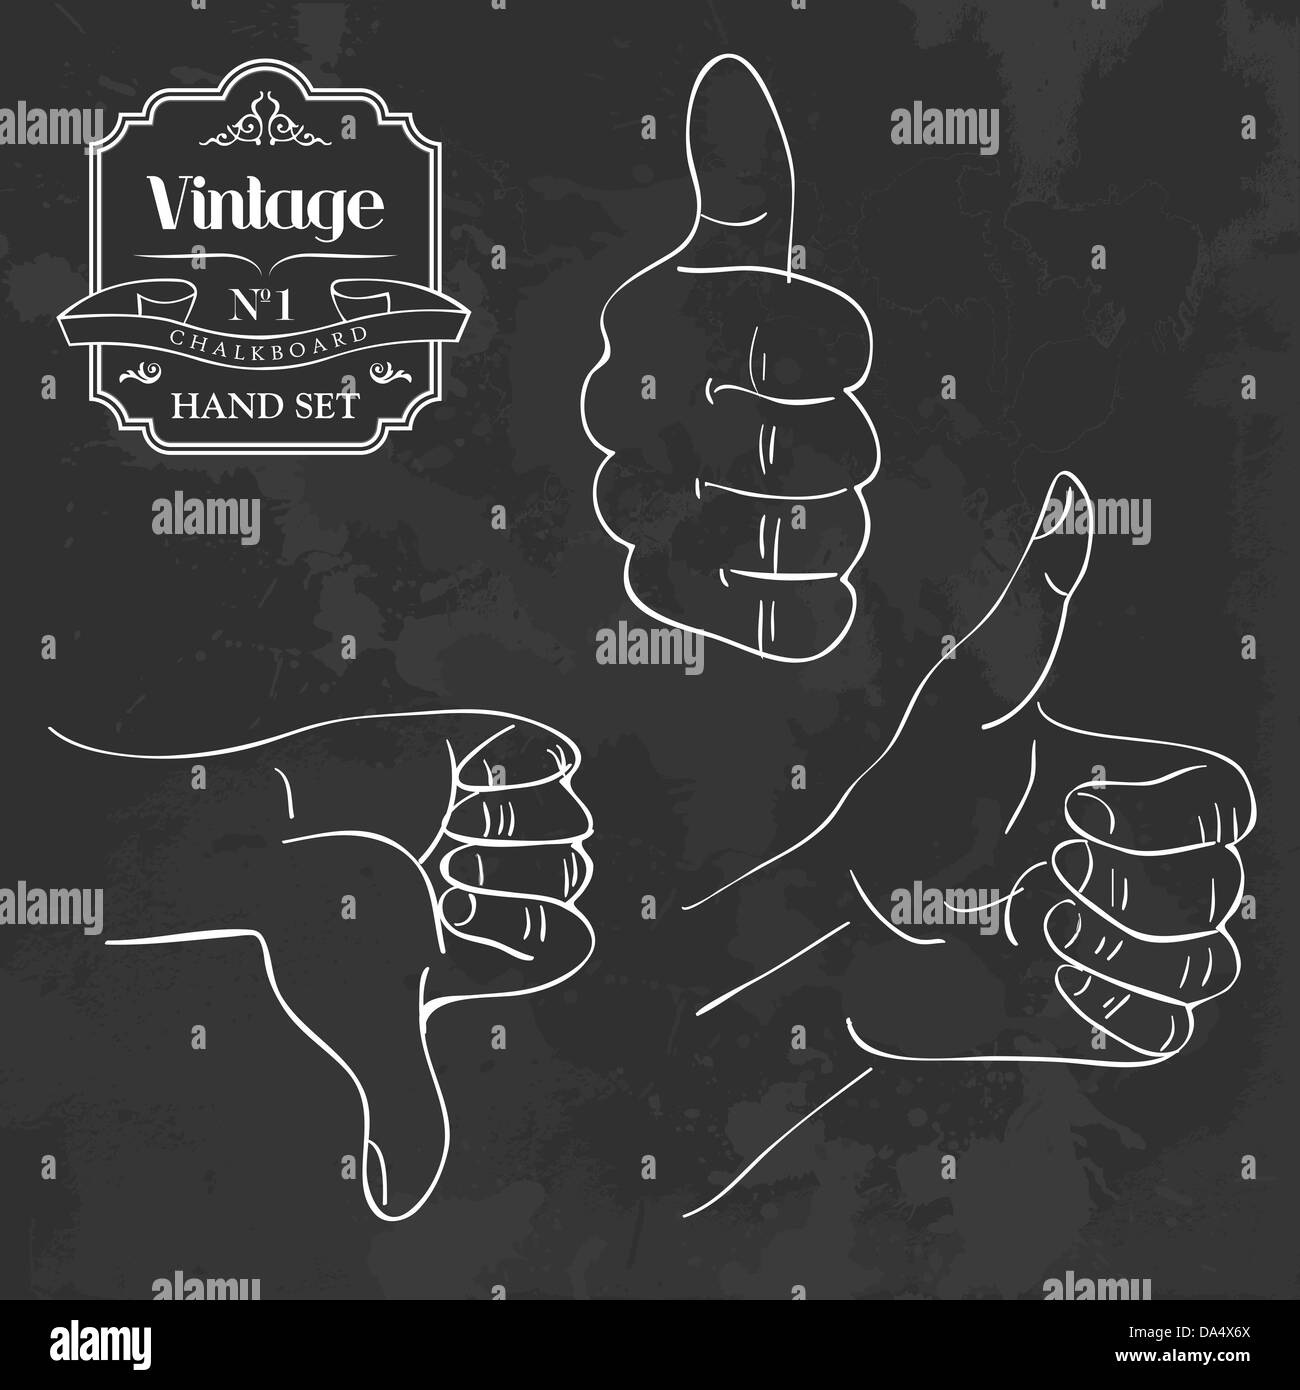 Retro blackboard OK thumb up and down hand gesture set. Vector illustration layered for easy manipulation and custom coloring. Stock Photo